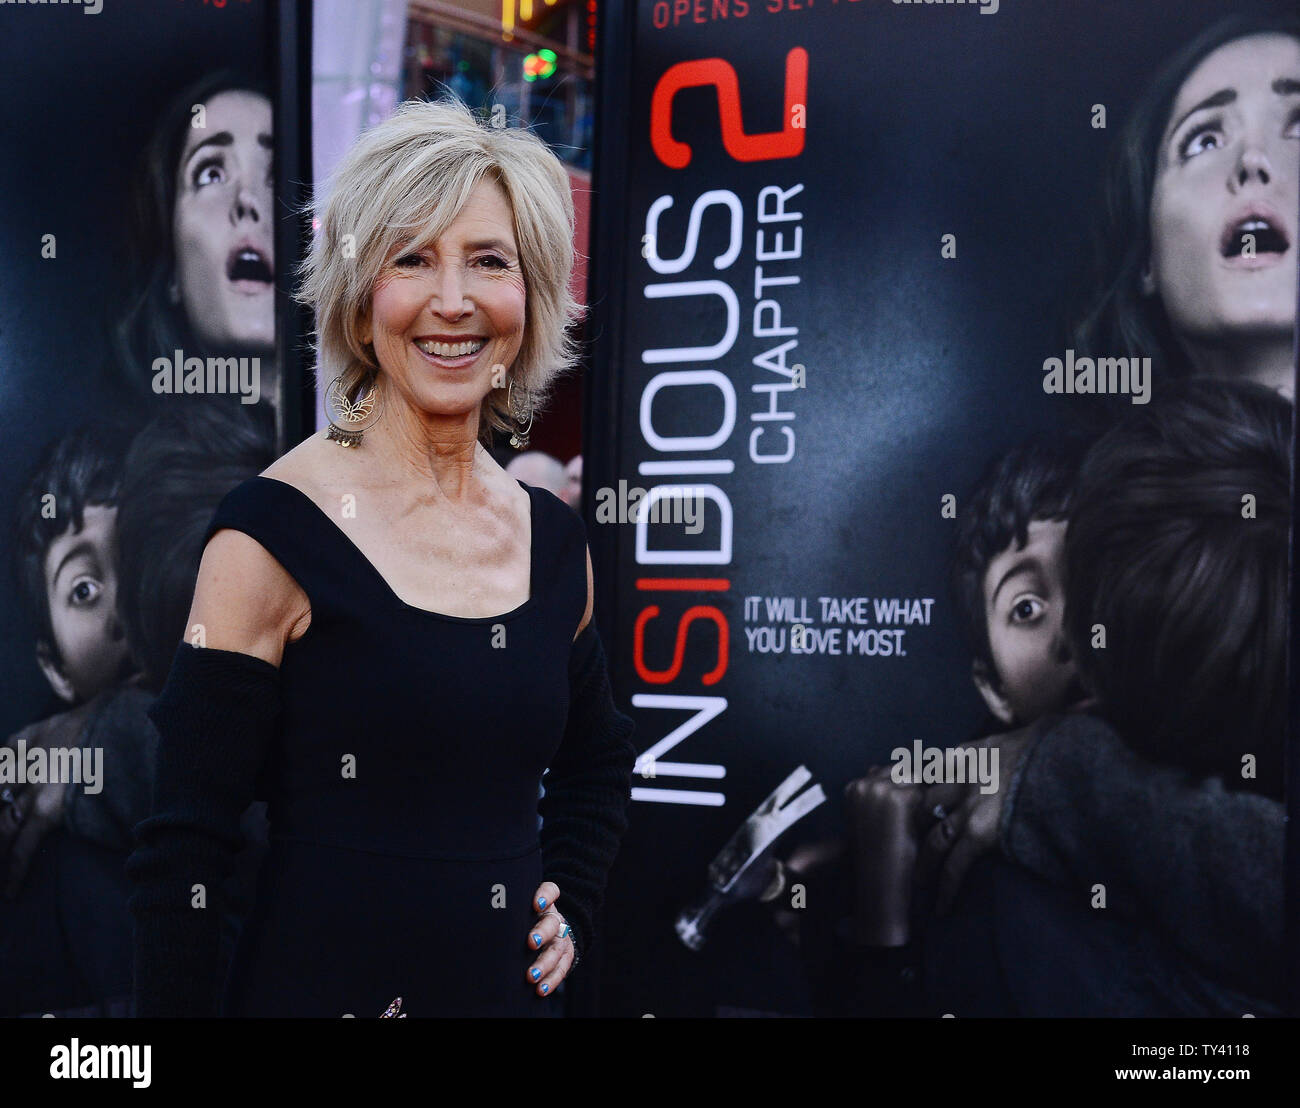 Cast member Lin Shaye attends the premiere of the motion picture horror thriller 'Insidious: Chapter 2' at Universal CityWalk in Universal City on September 10, 2013. The haunted Lambert family seeks to uncover the mysterious childhood secret that has left them dangerously connected to the spirit world.  UPI/Jim Ruymen Stock Photo